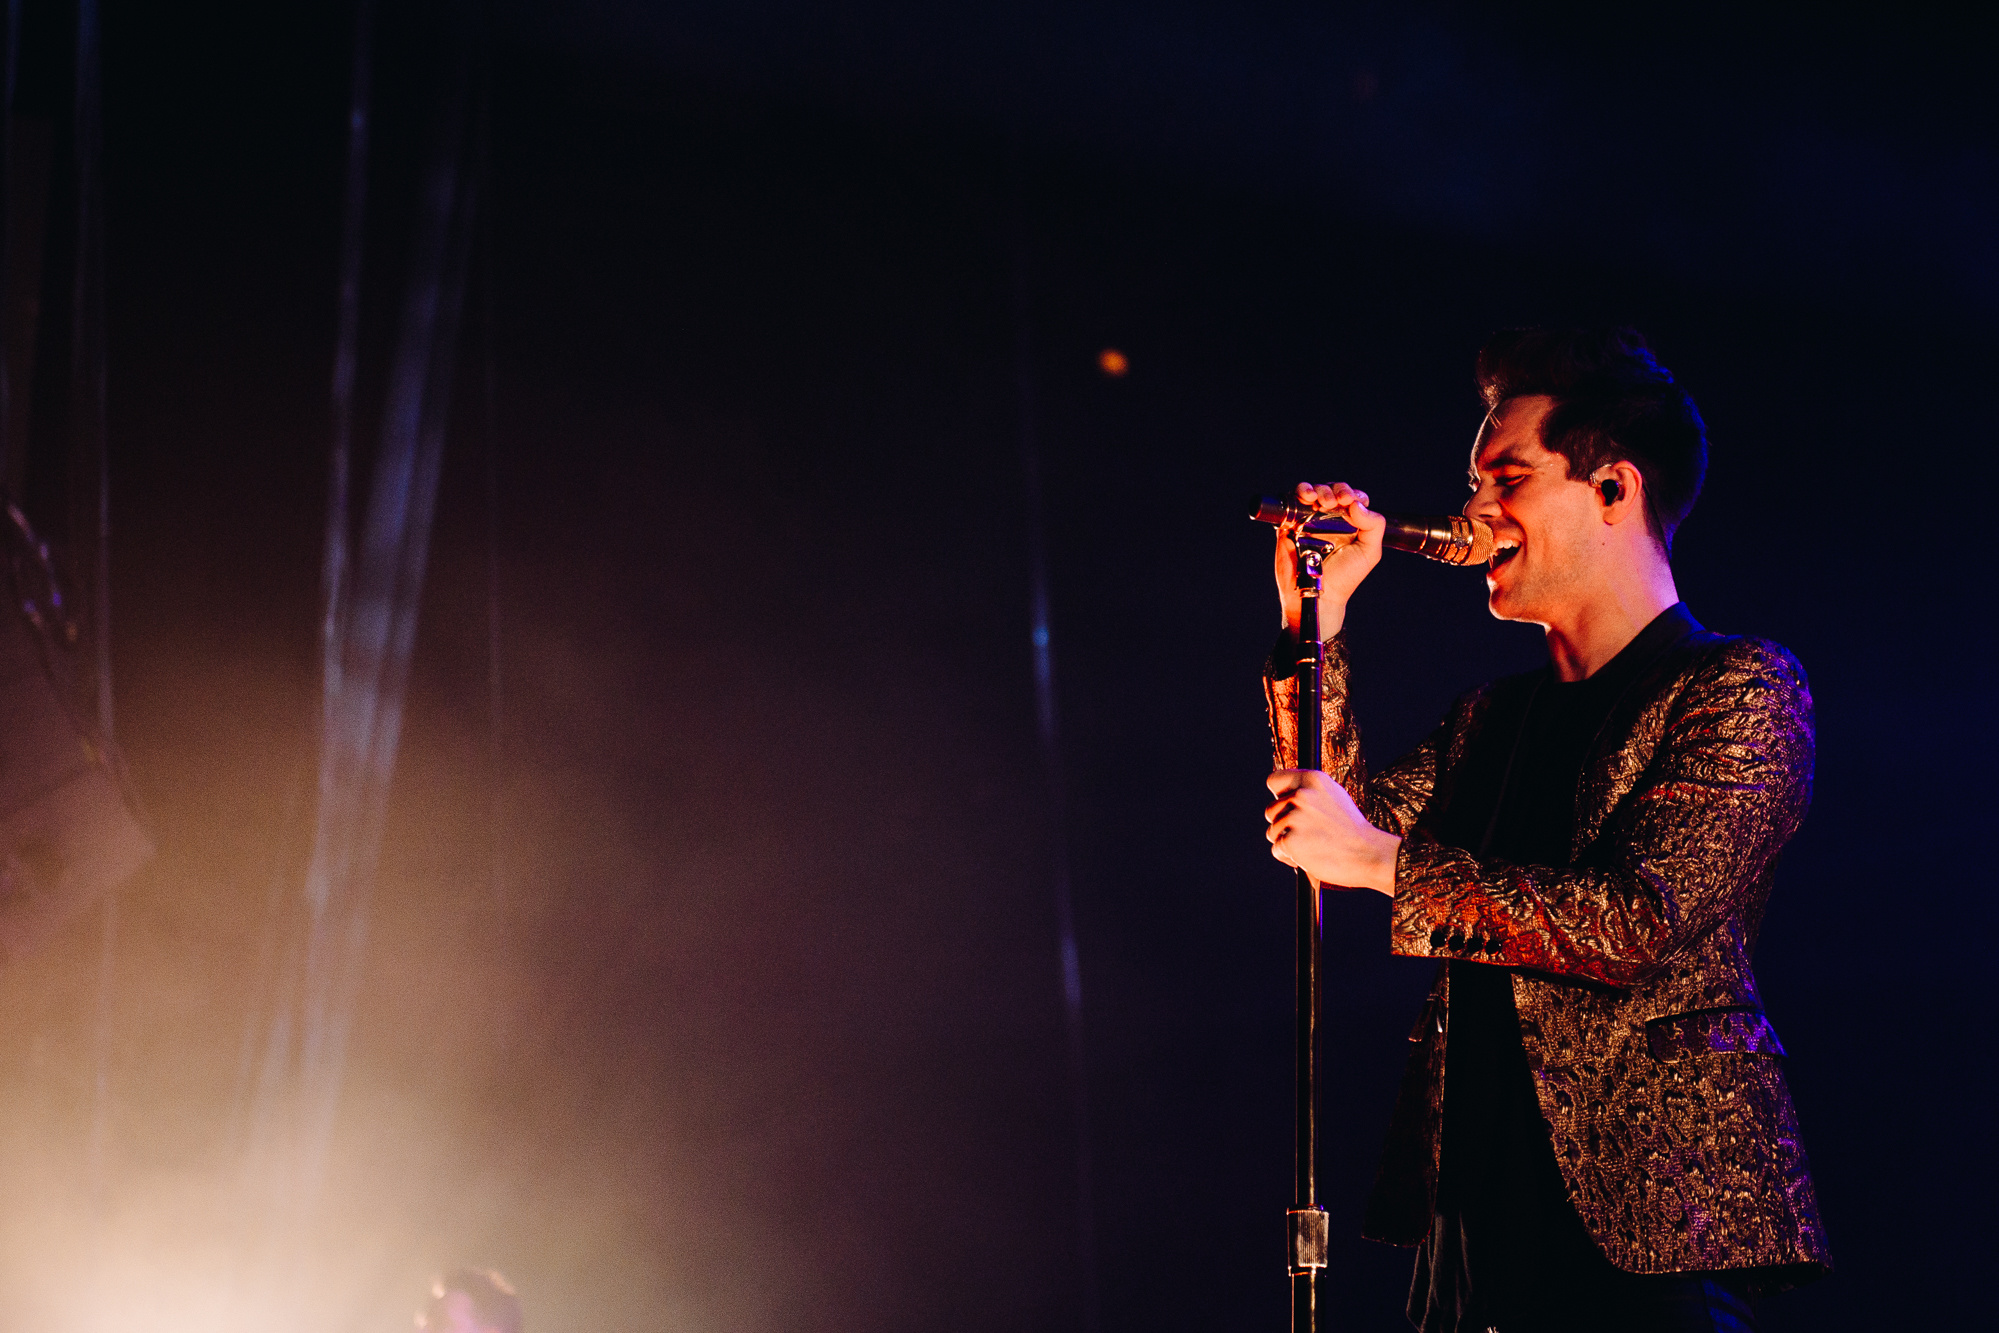 Panic! at the Disco, Concert tickets, Live music experience, Fan excitement, 2000x1340 HD Desktop